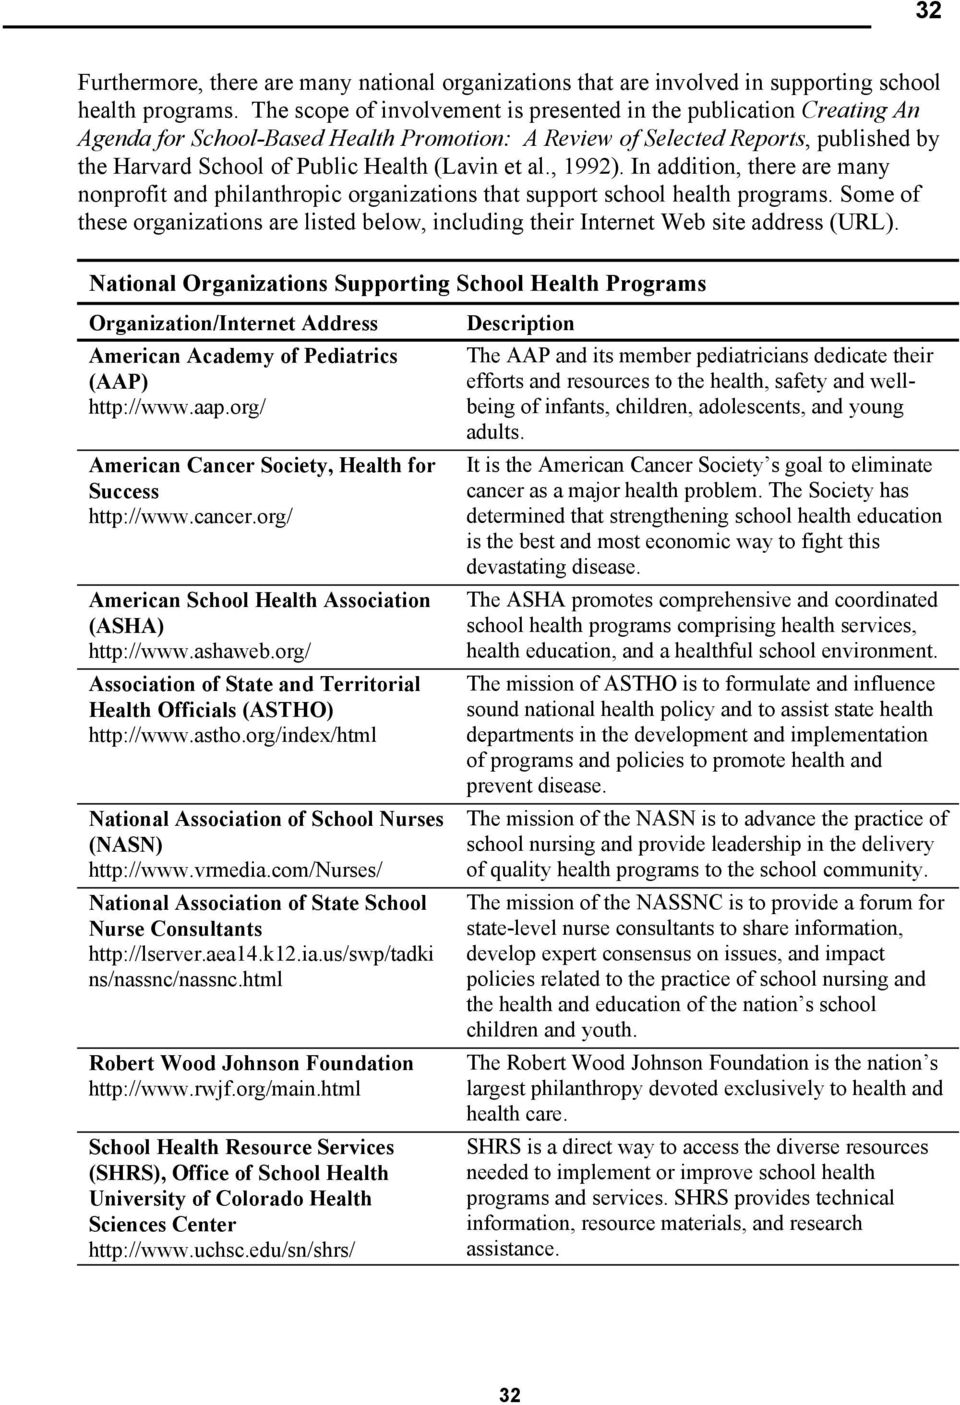 al., 1992). In addition, there are many nonprofit and philanthropic organizations that support school health programs.